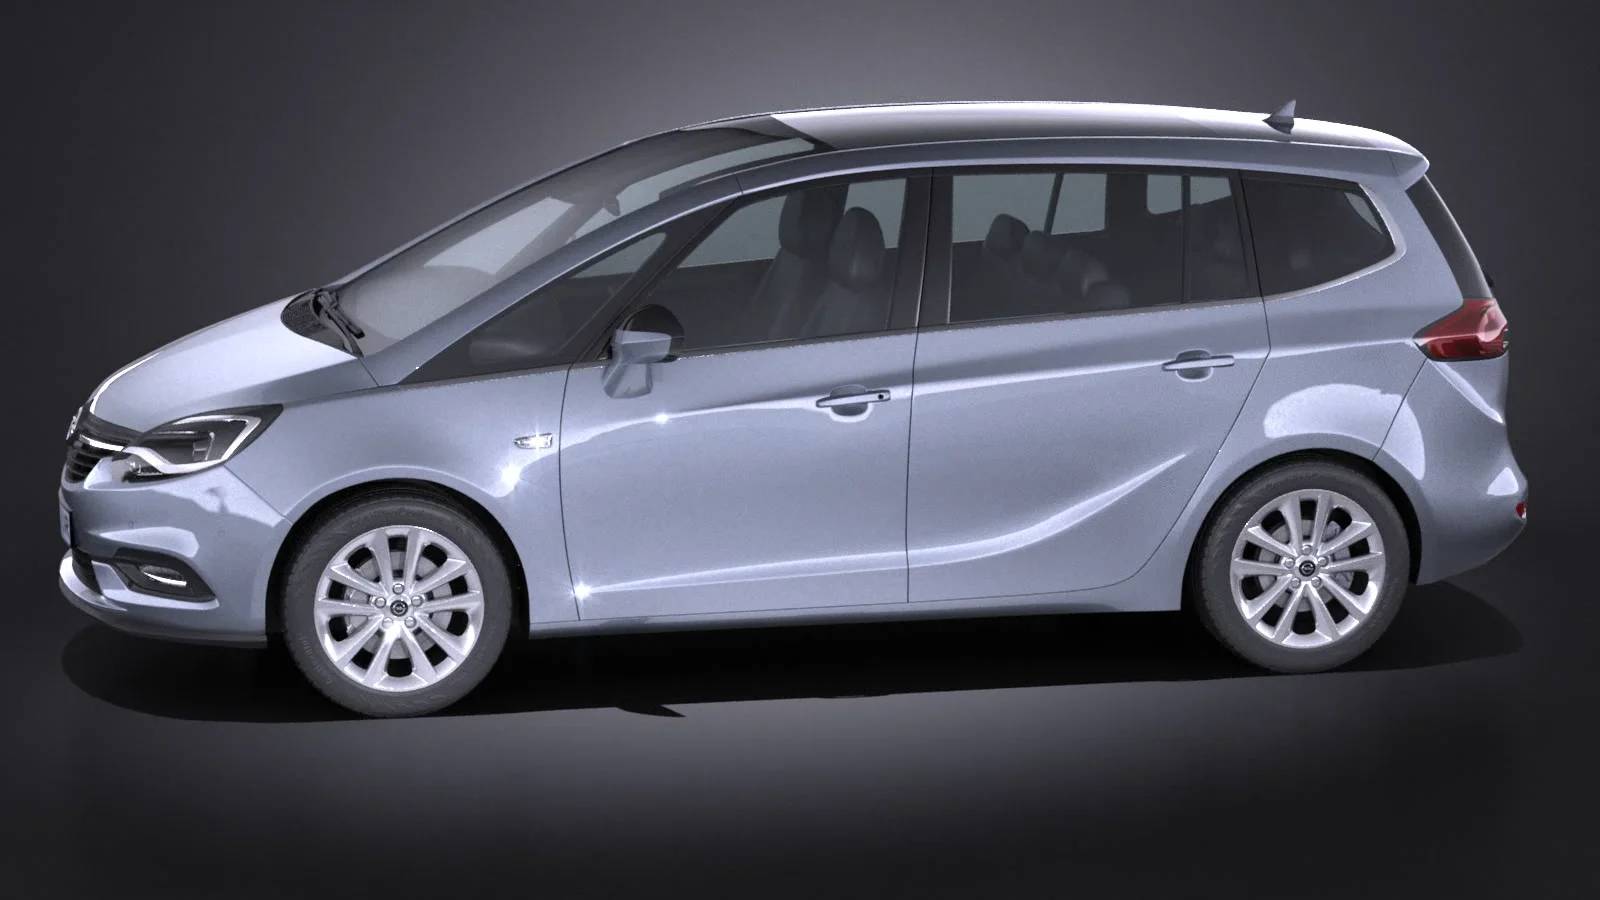 11,154 Opel Zafira Images, Stock Photos, 3D objects, & Vectors